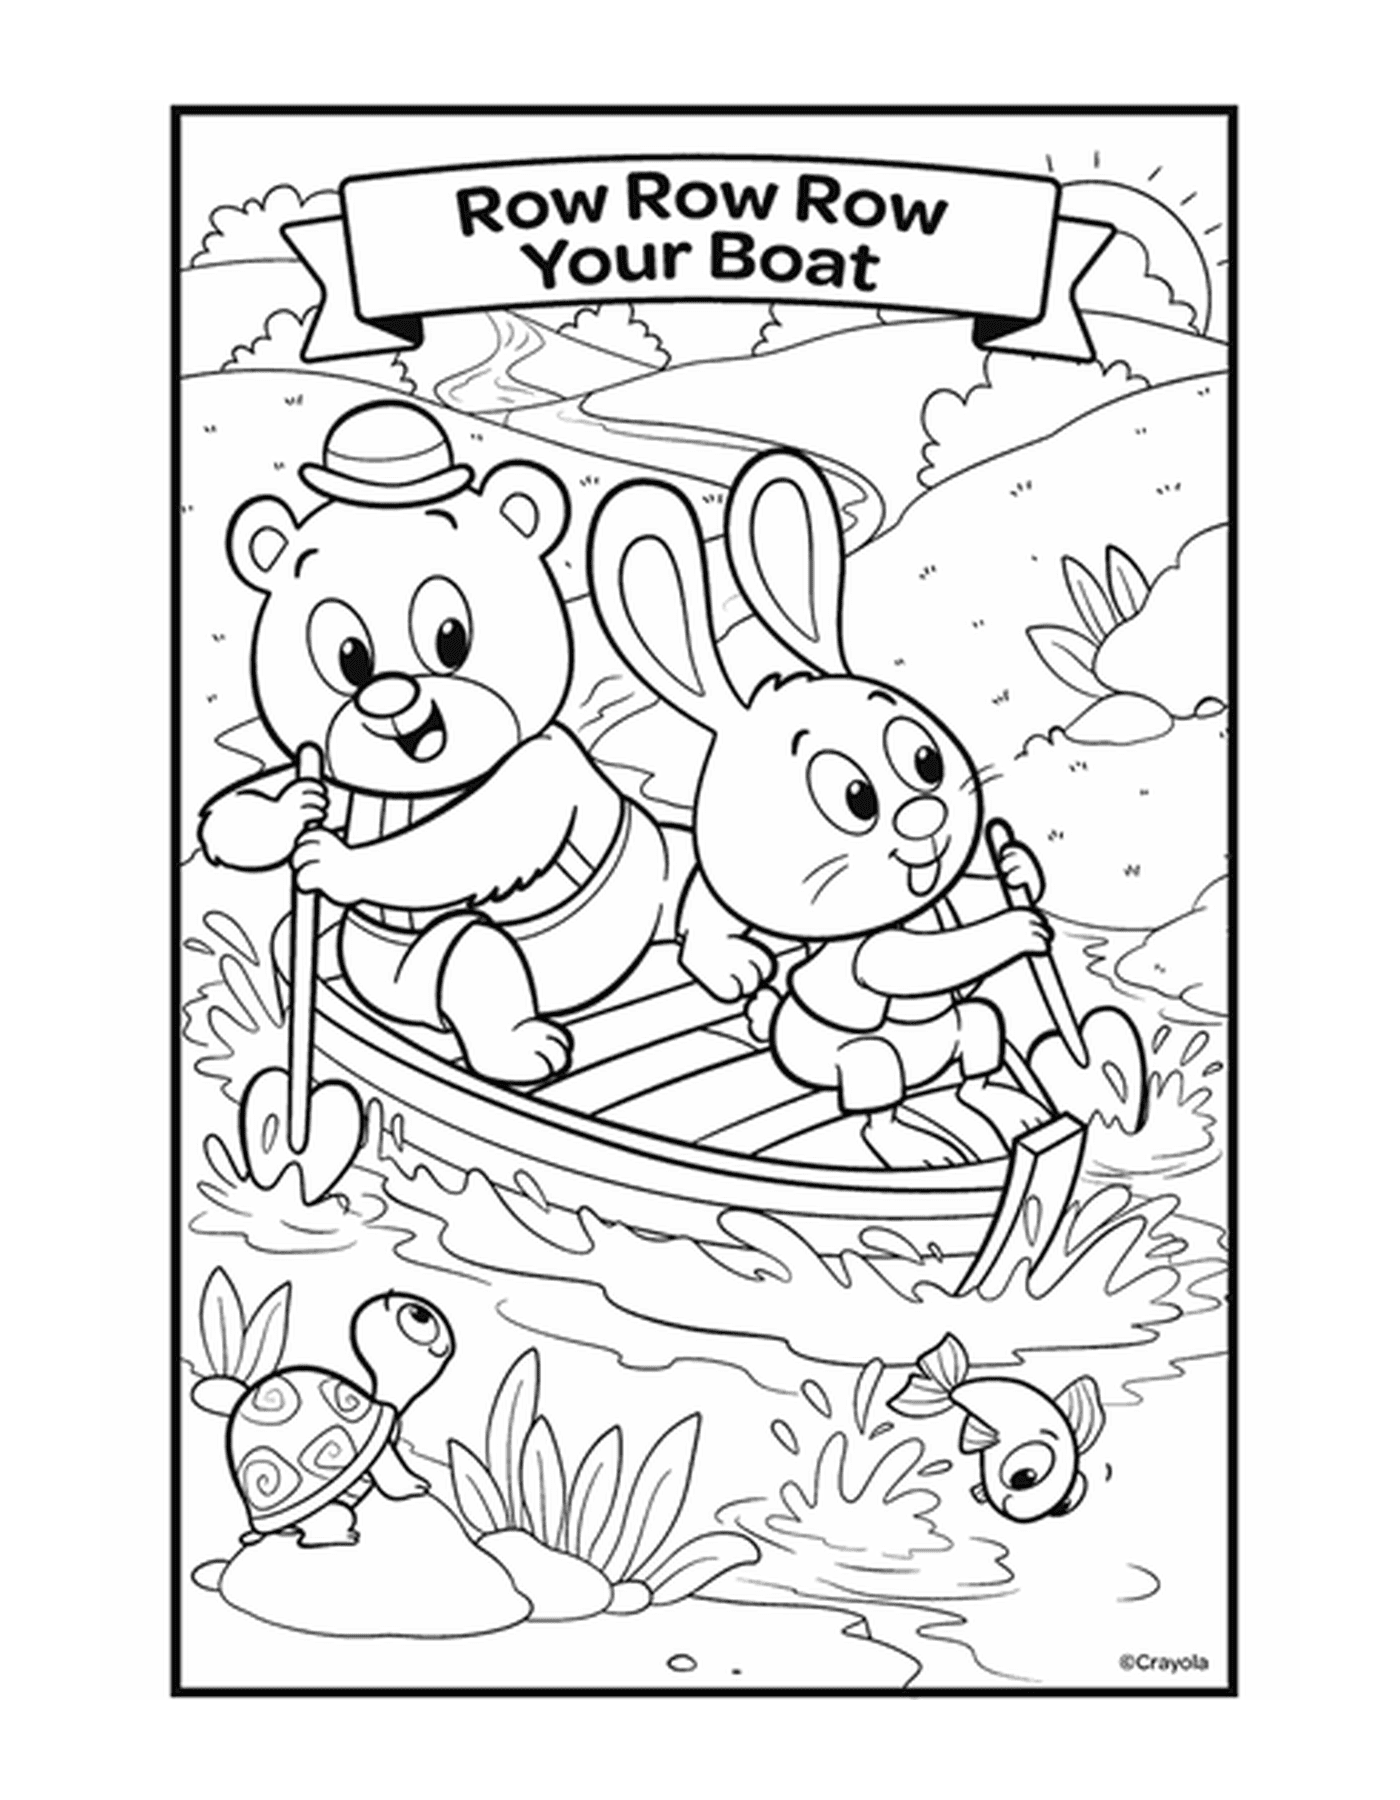  The figure Row, Row, Row Your Boat with two animals in a boat on the water 